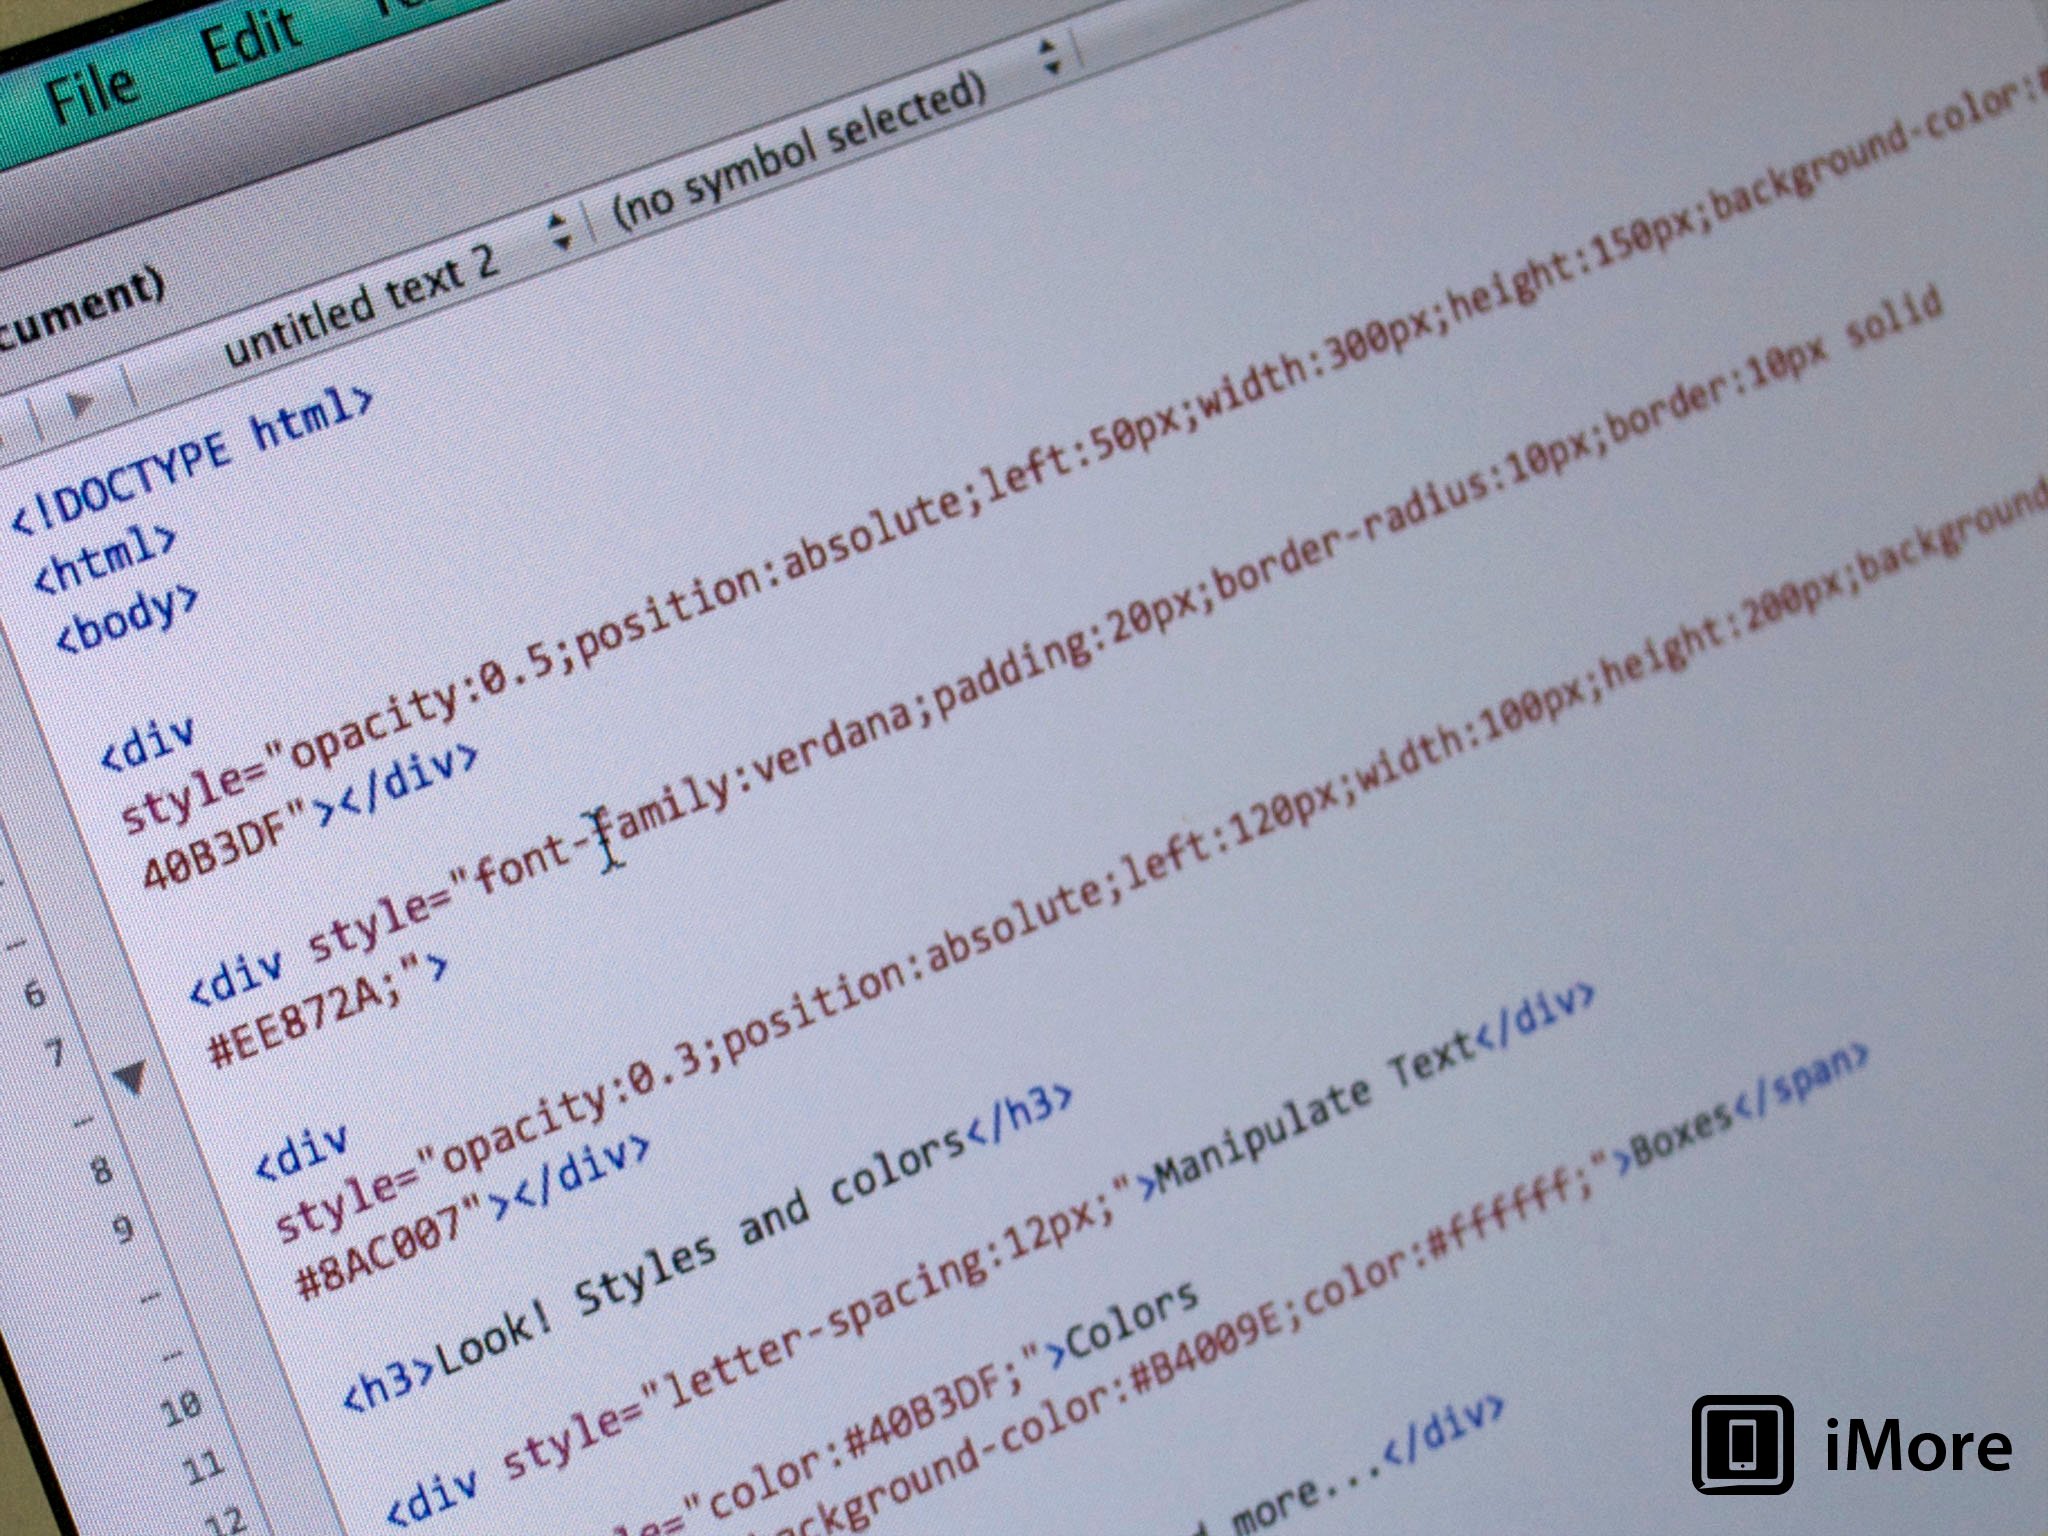 The best free and paid text editors for the Mac